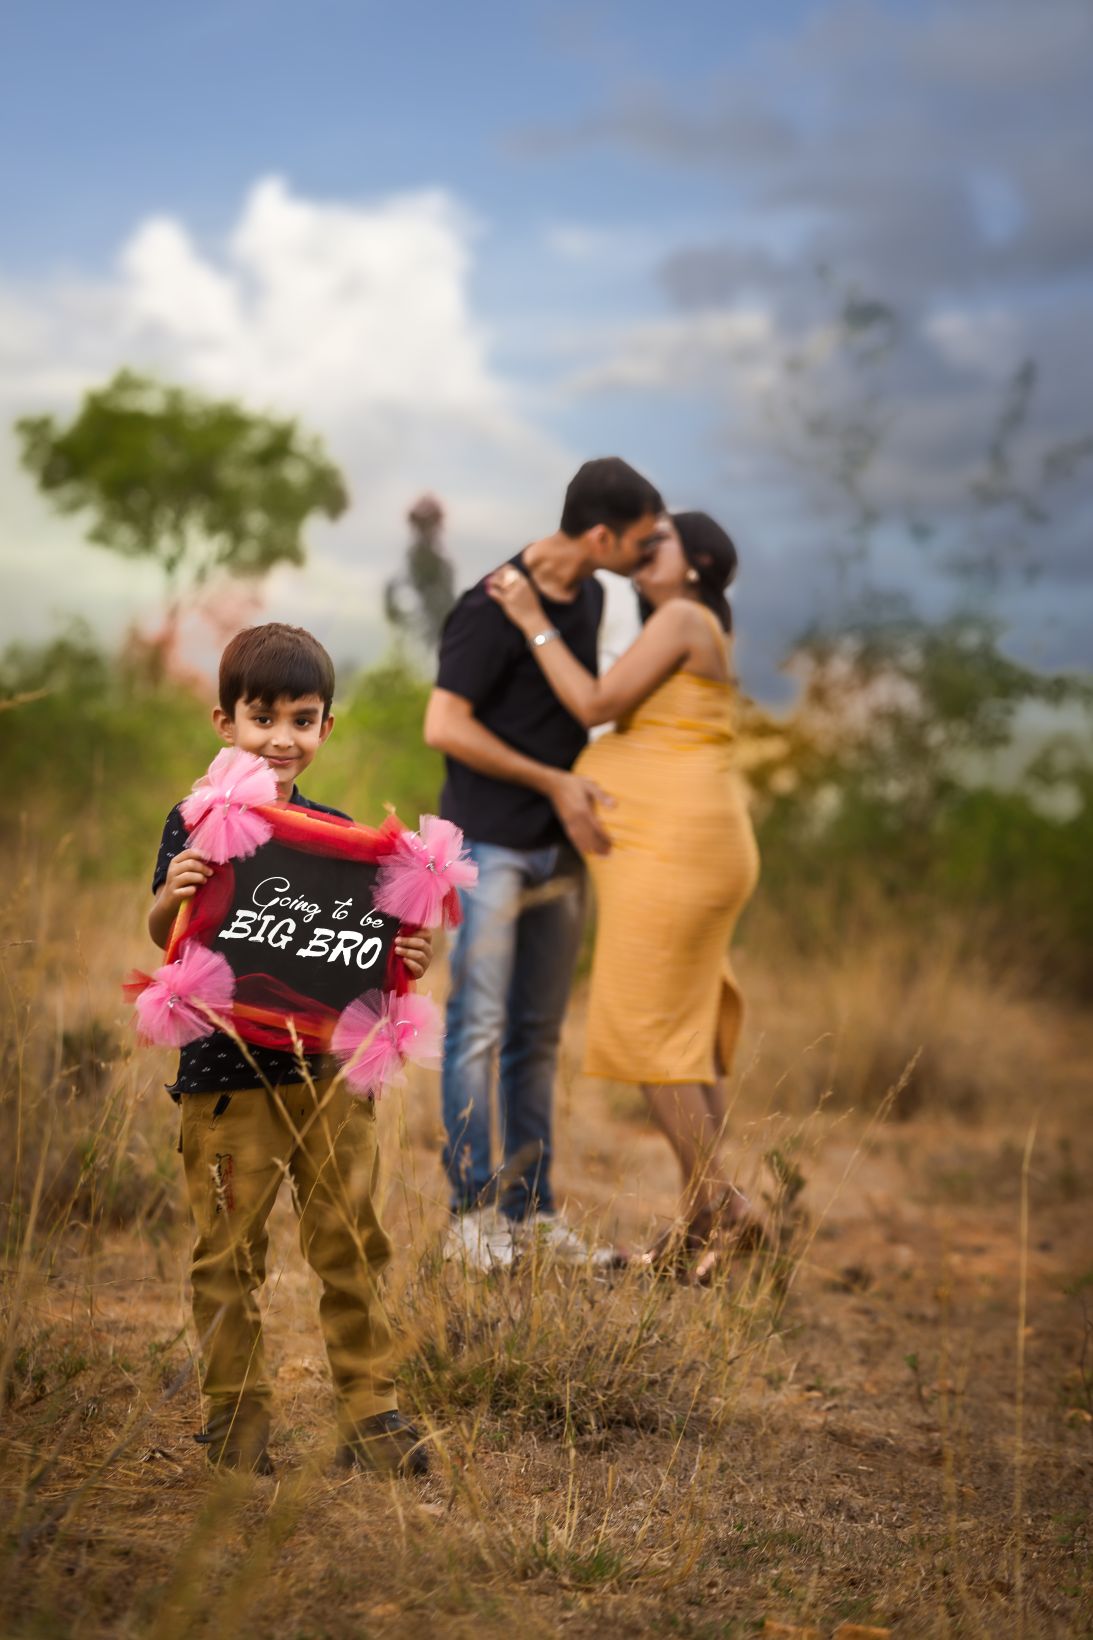 The Top Professional Photoshoot Maternity Shoot Photographer in Pune India